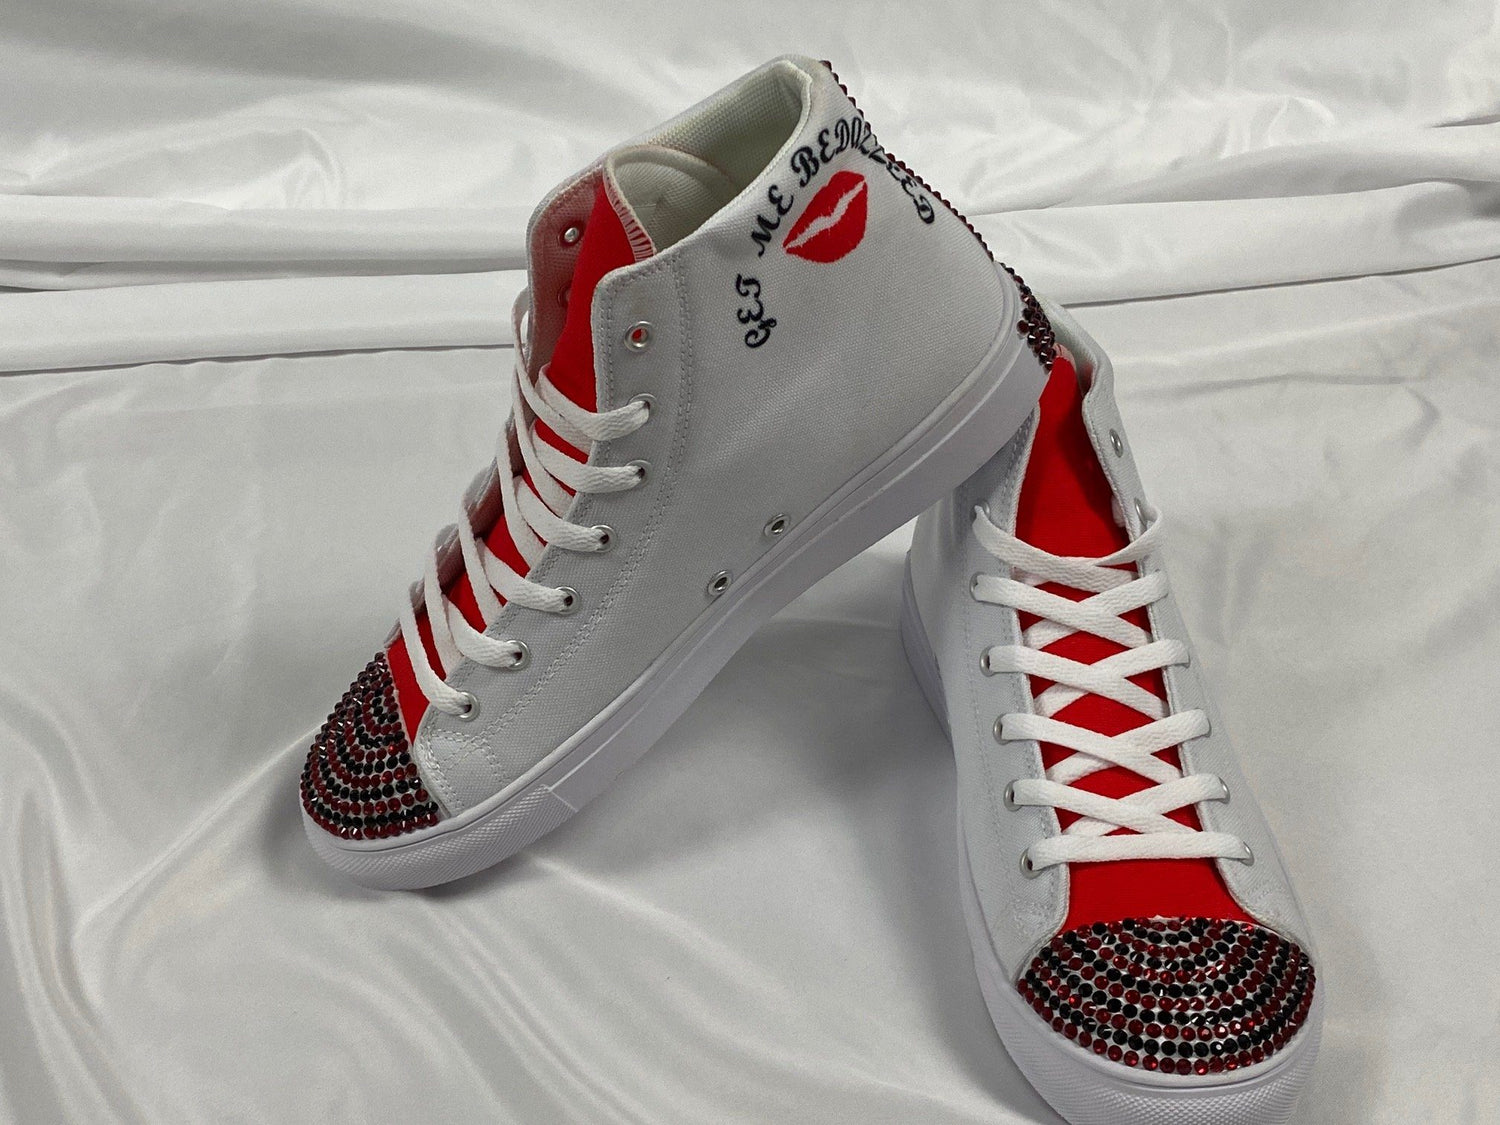 Custom Bling Rhinestone White Sneakers Bedazzled Tennis Shoes